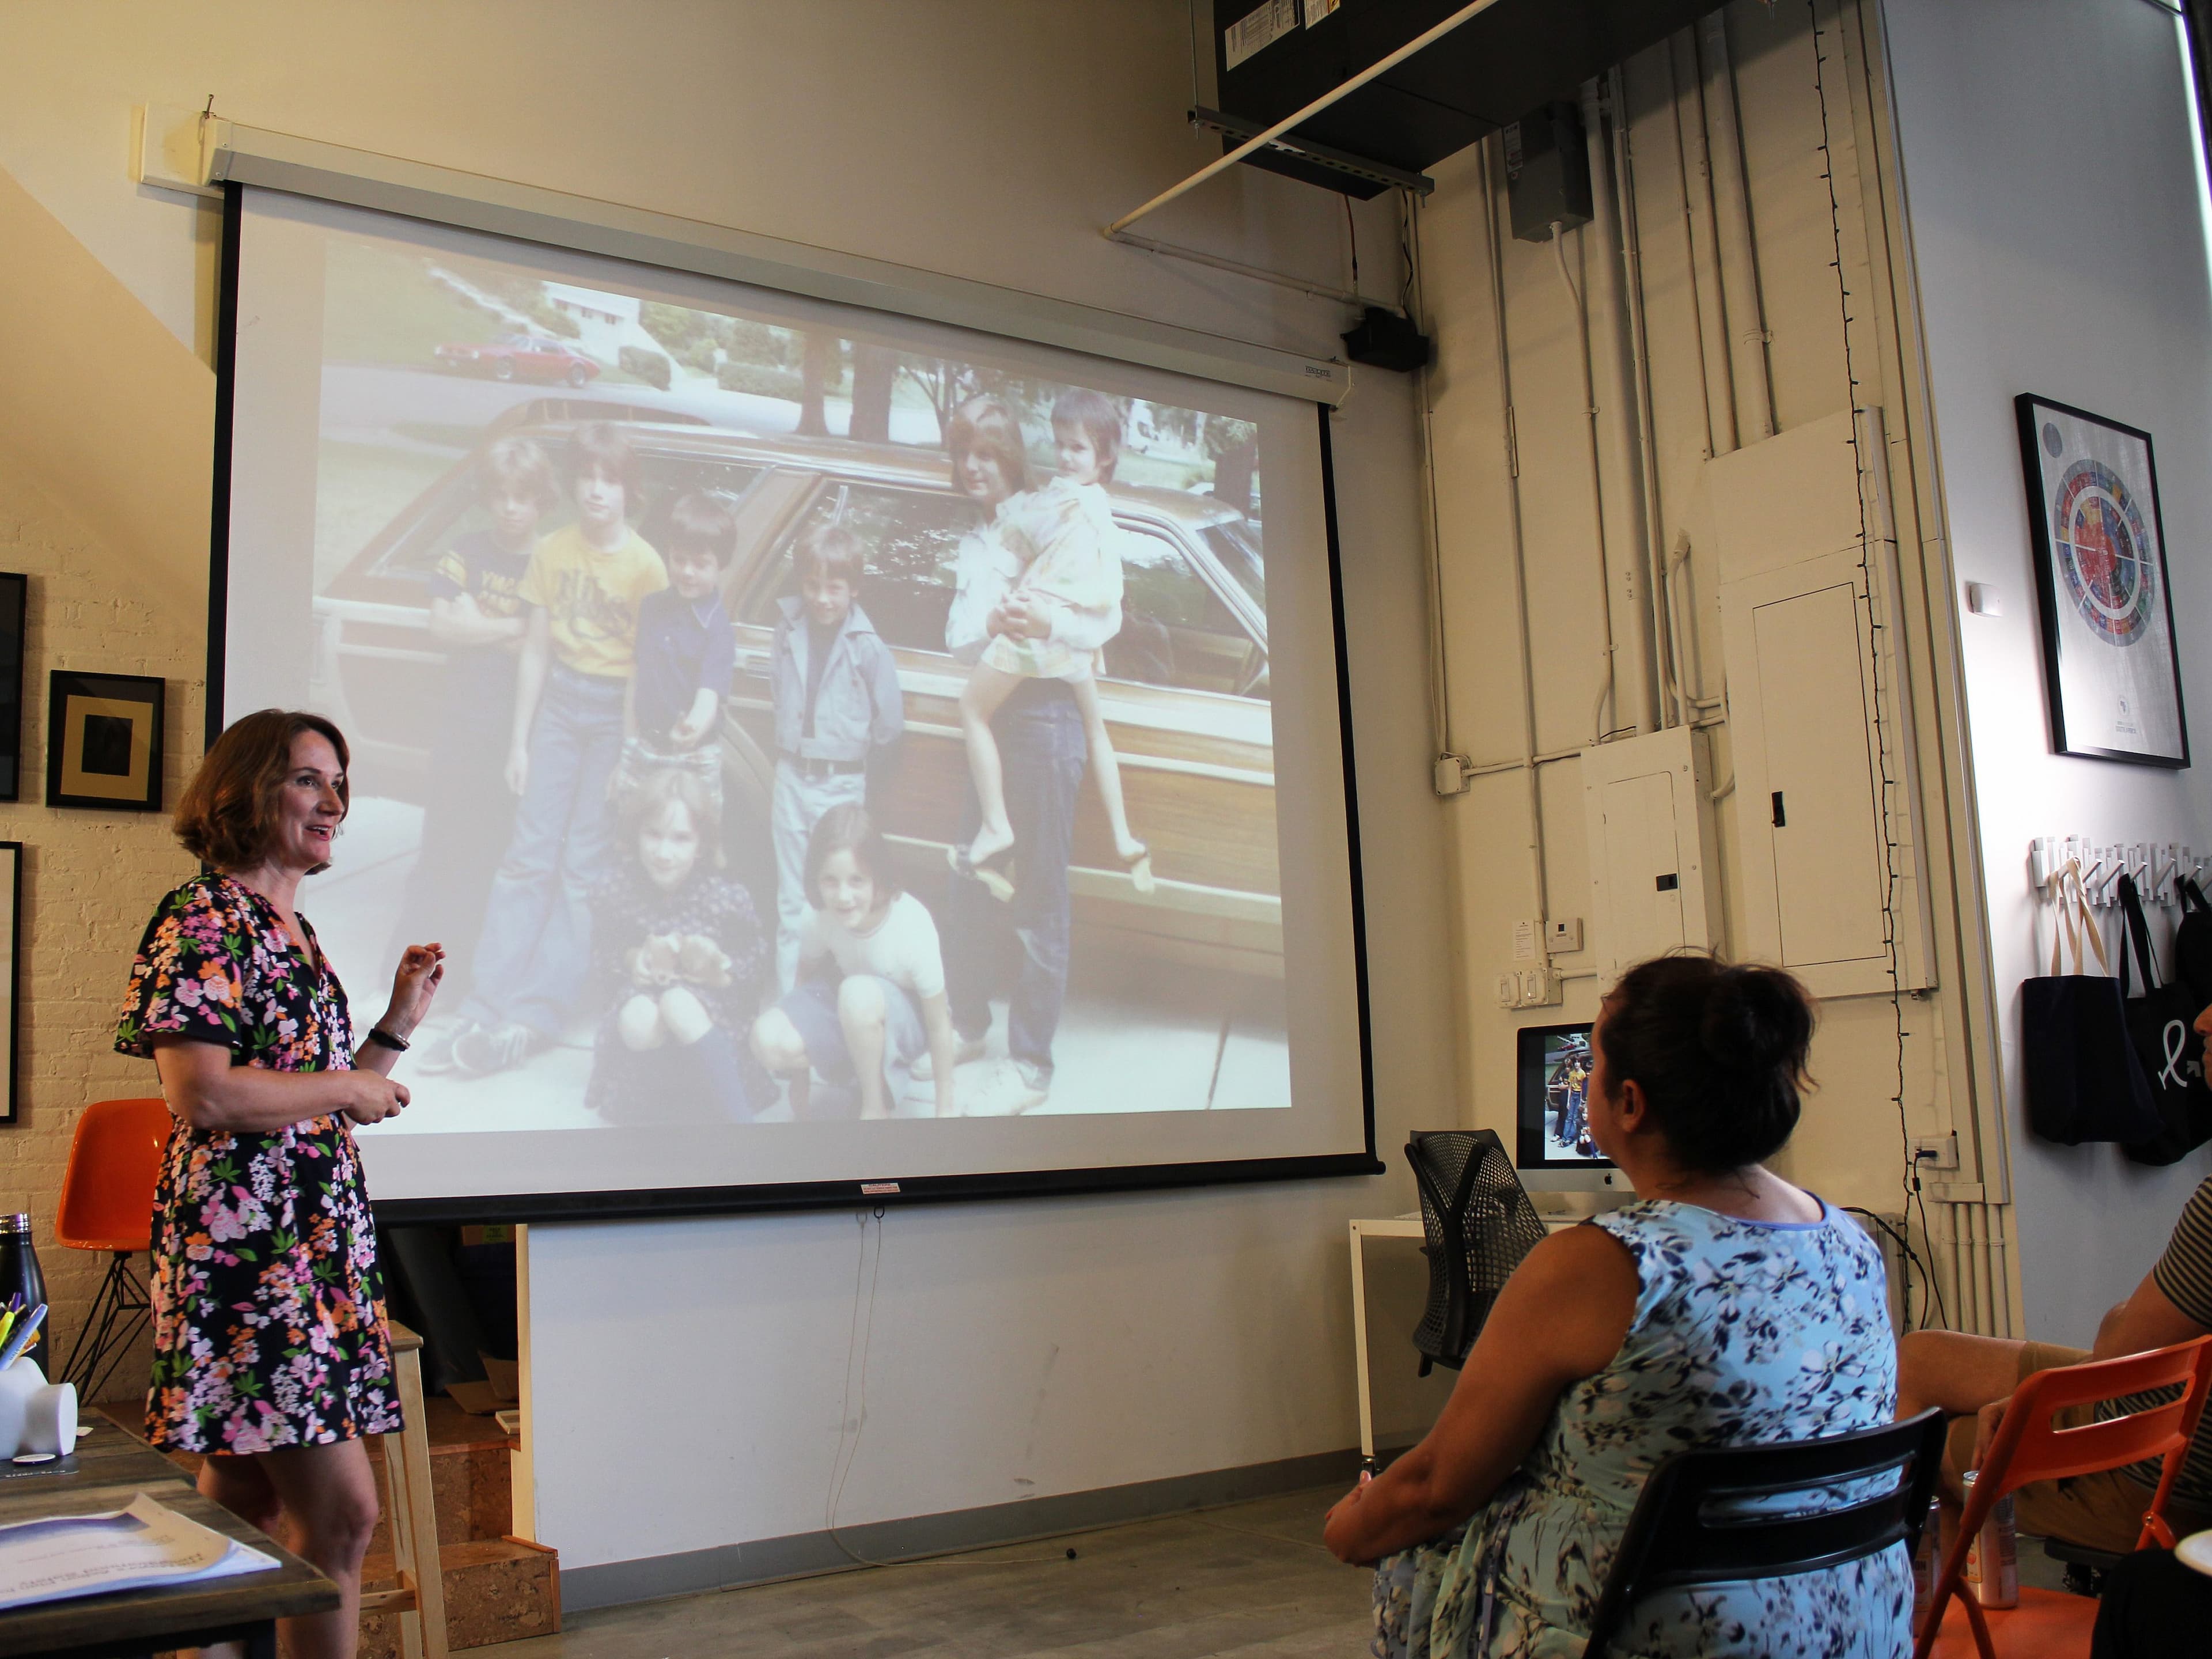 A woman in a floral dress speaks to a seated audience, pointing at a projected image of a family posing next to a station wagon. The setting appears to be a workshop or classroom with artwork on the walls and chairs arranged for attendees.